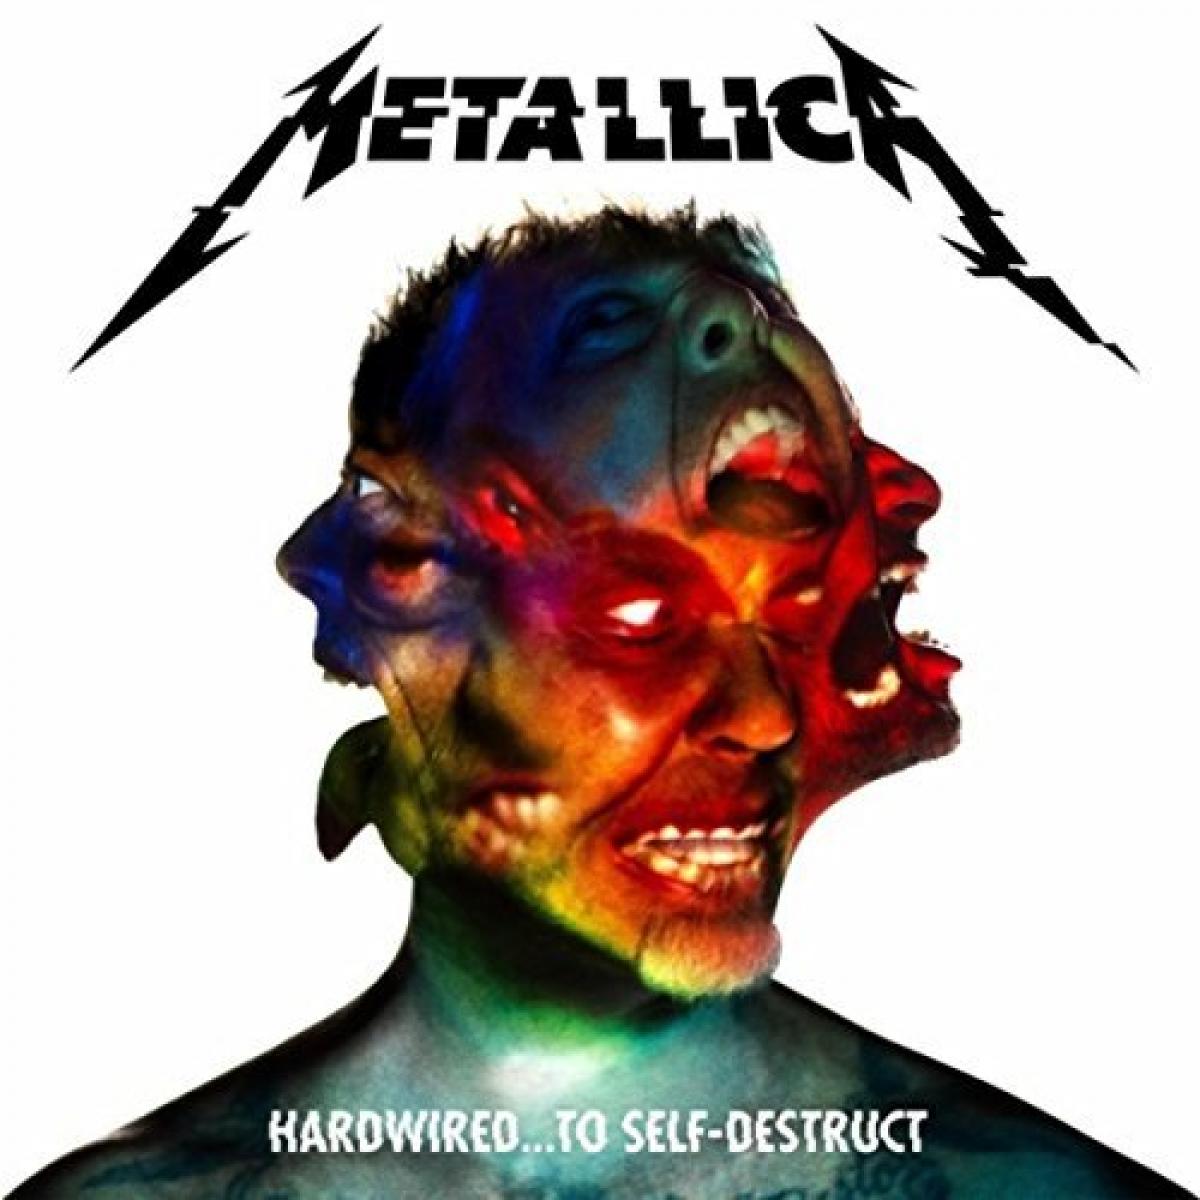 Hardwired... to Self-Destruct by Metallica